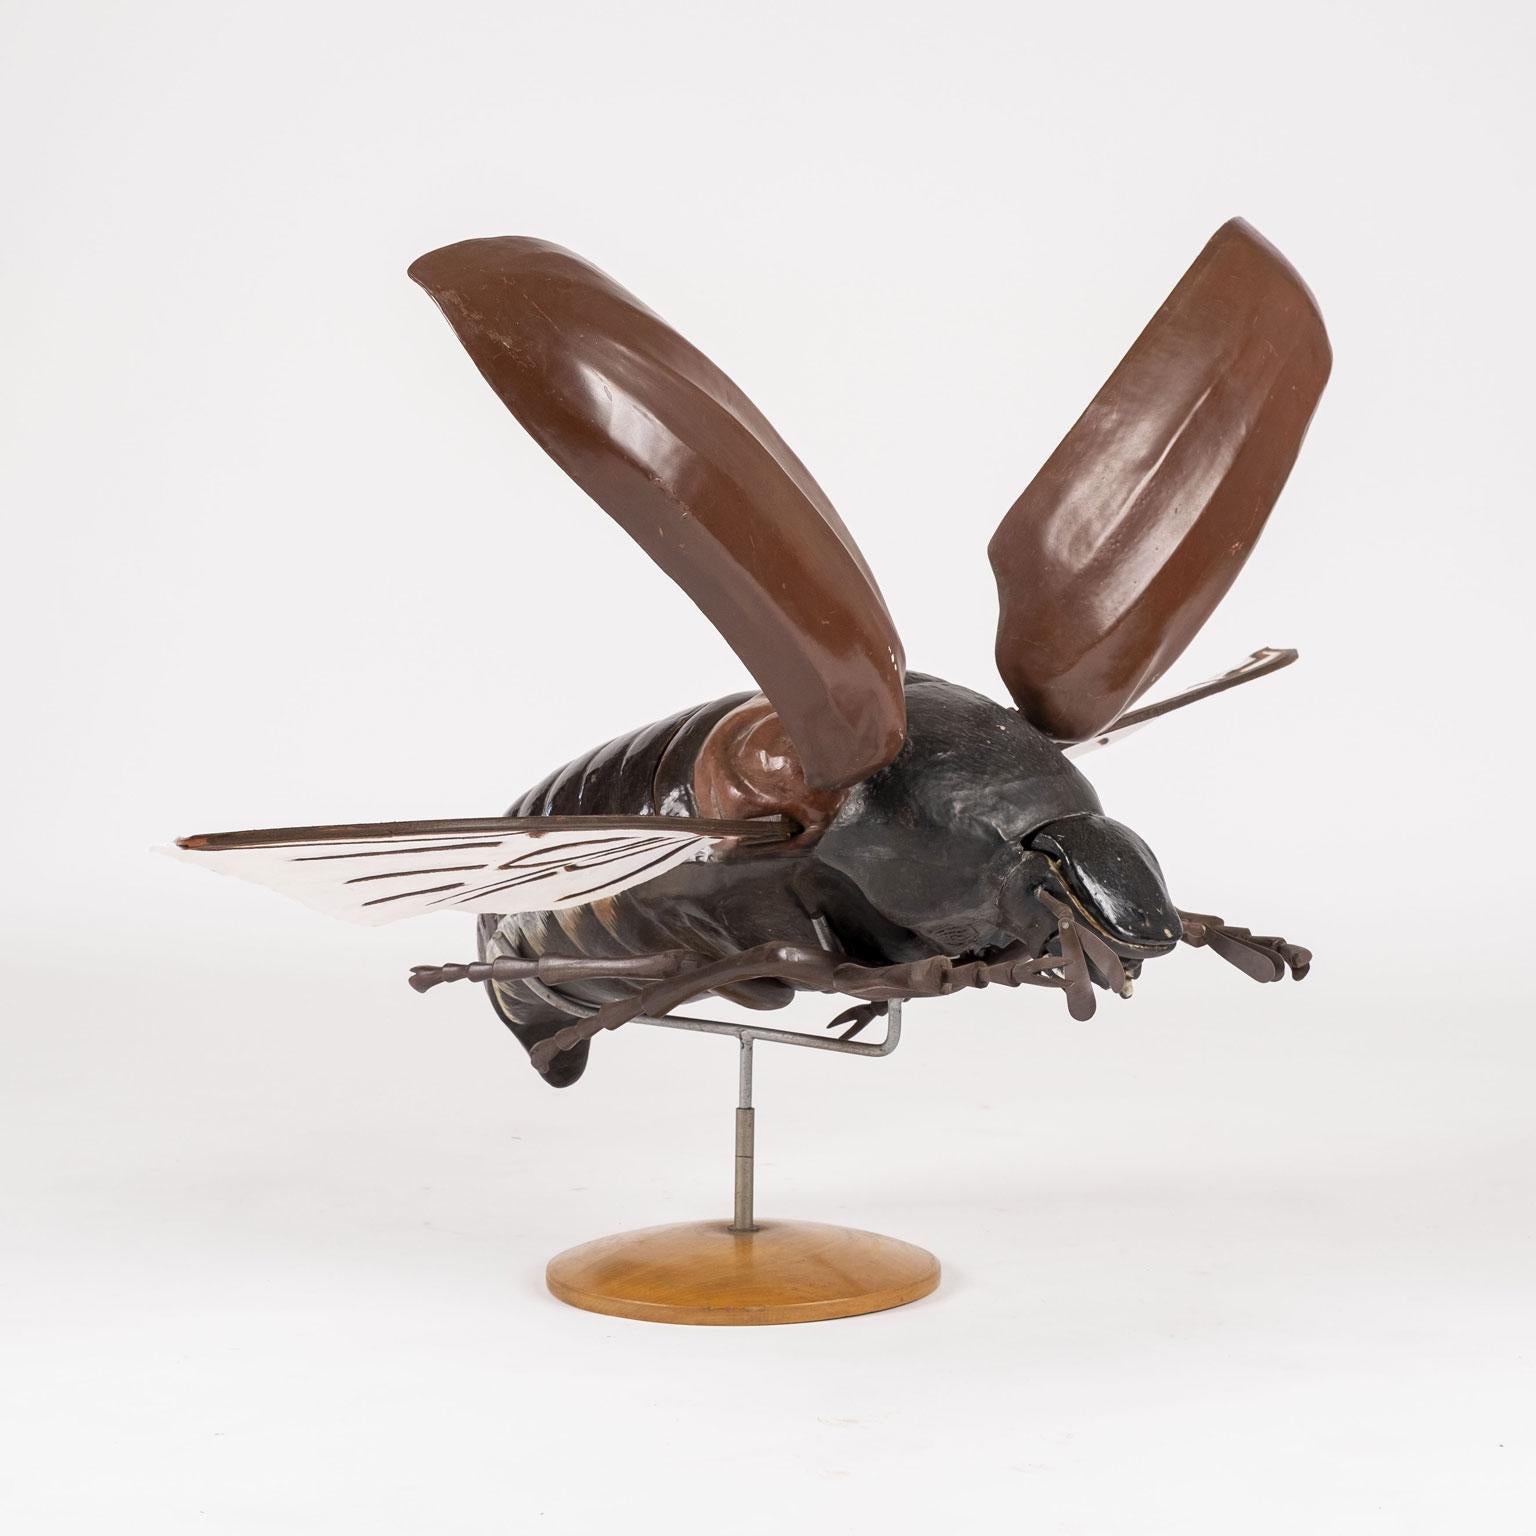 Other Large Sculpture of Beetle in Flight For Sale